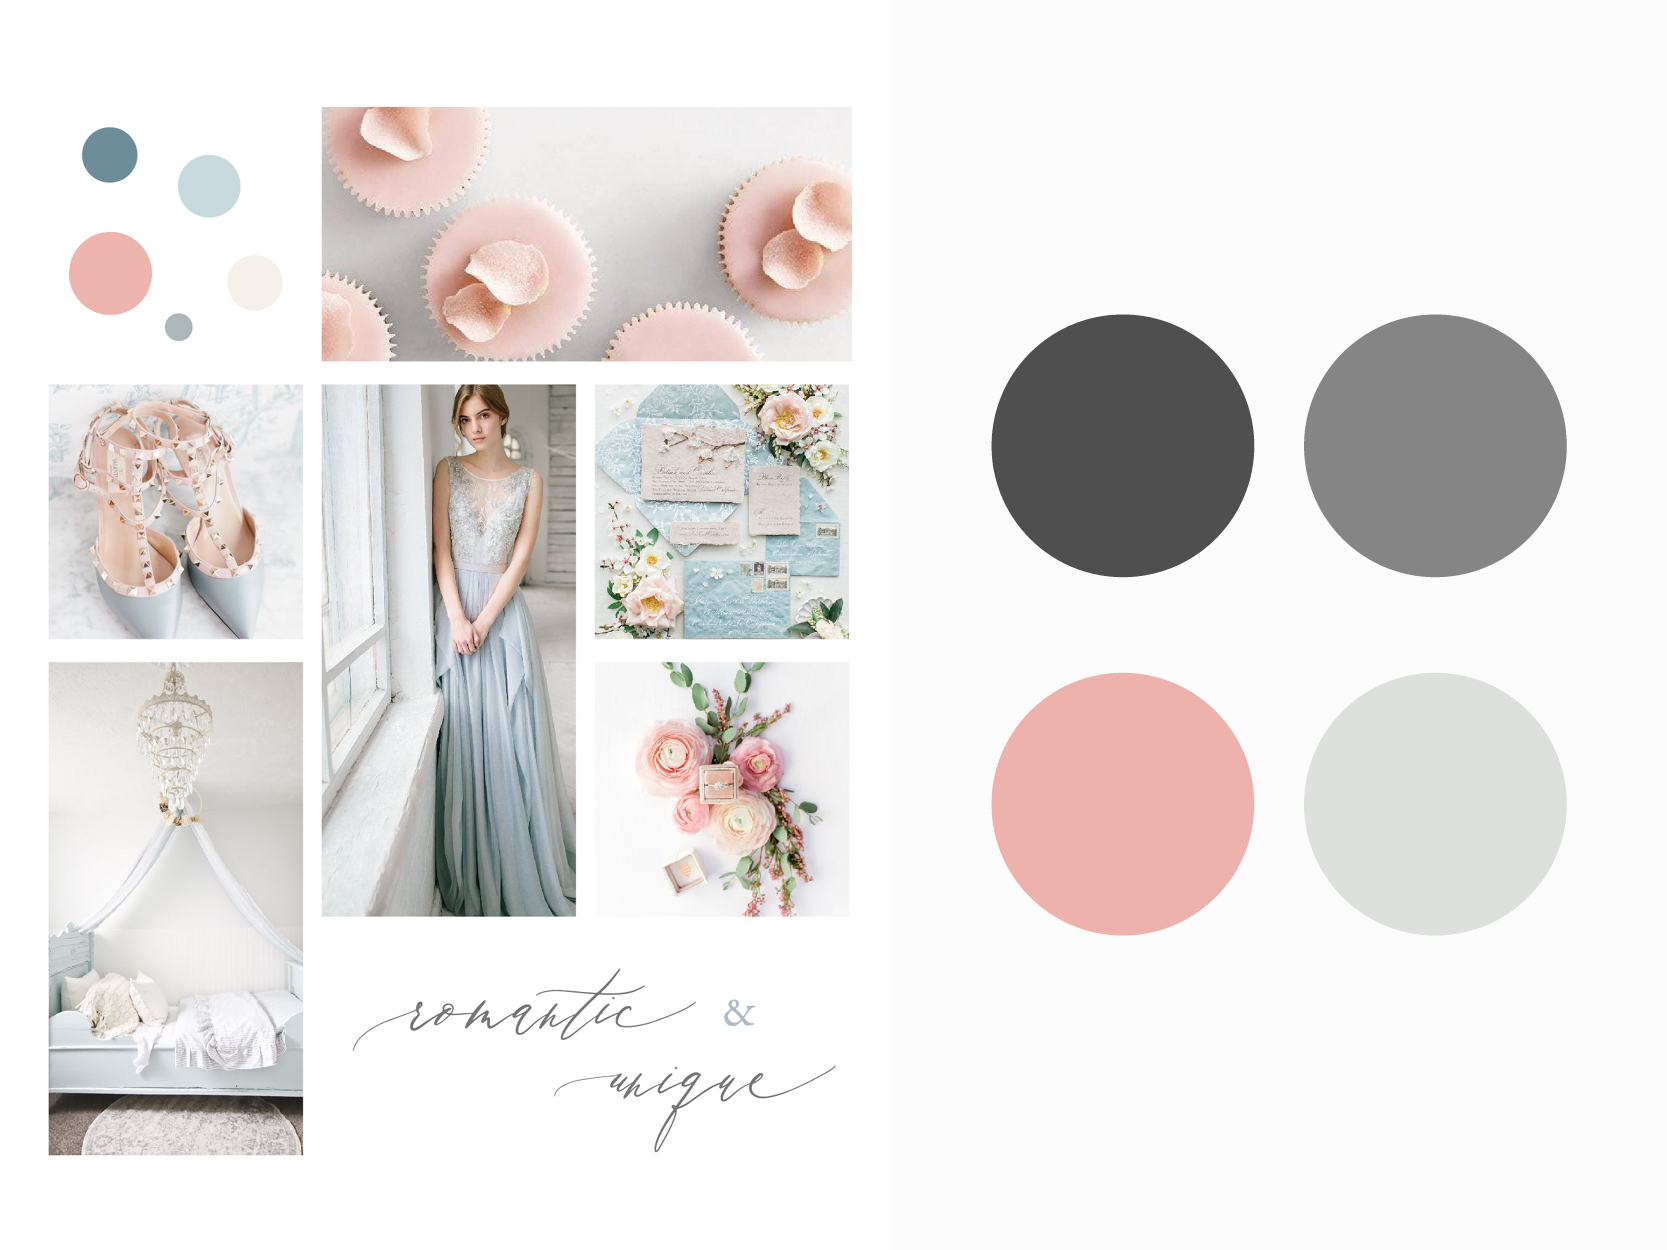 Emma Rose Company designed her custom Squarespace website who primarily works with photographers to help them reach their business goals through thoughtful design.